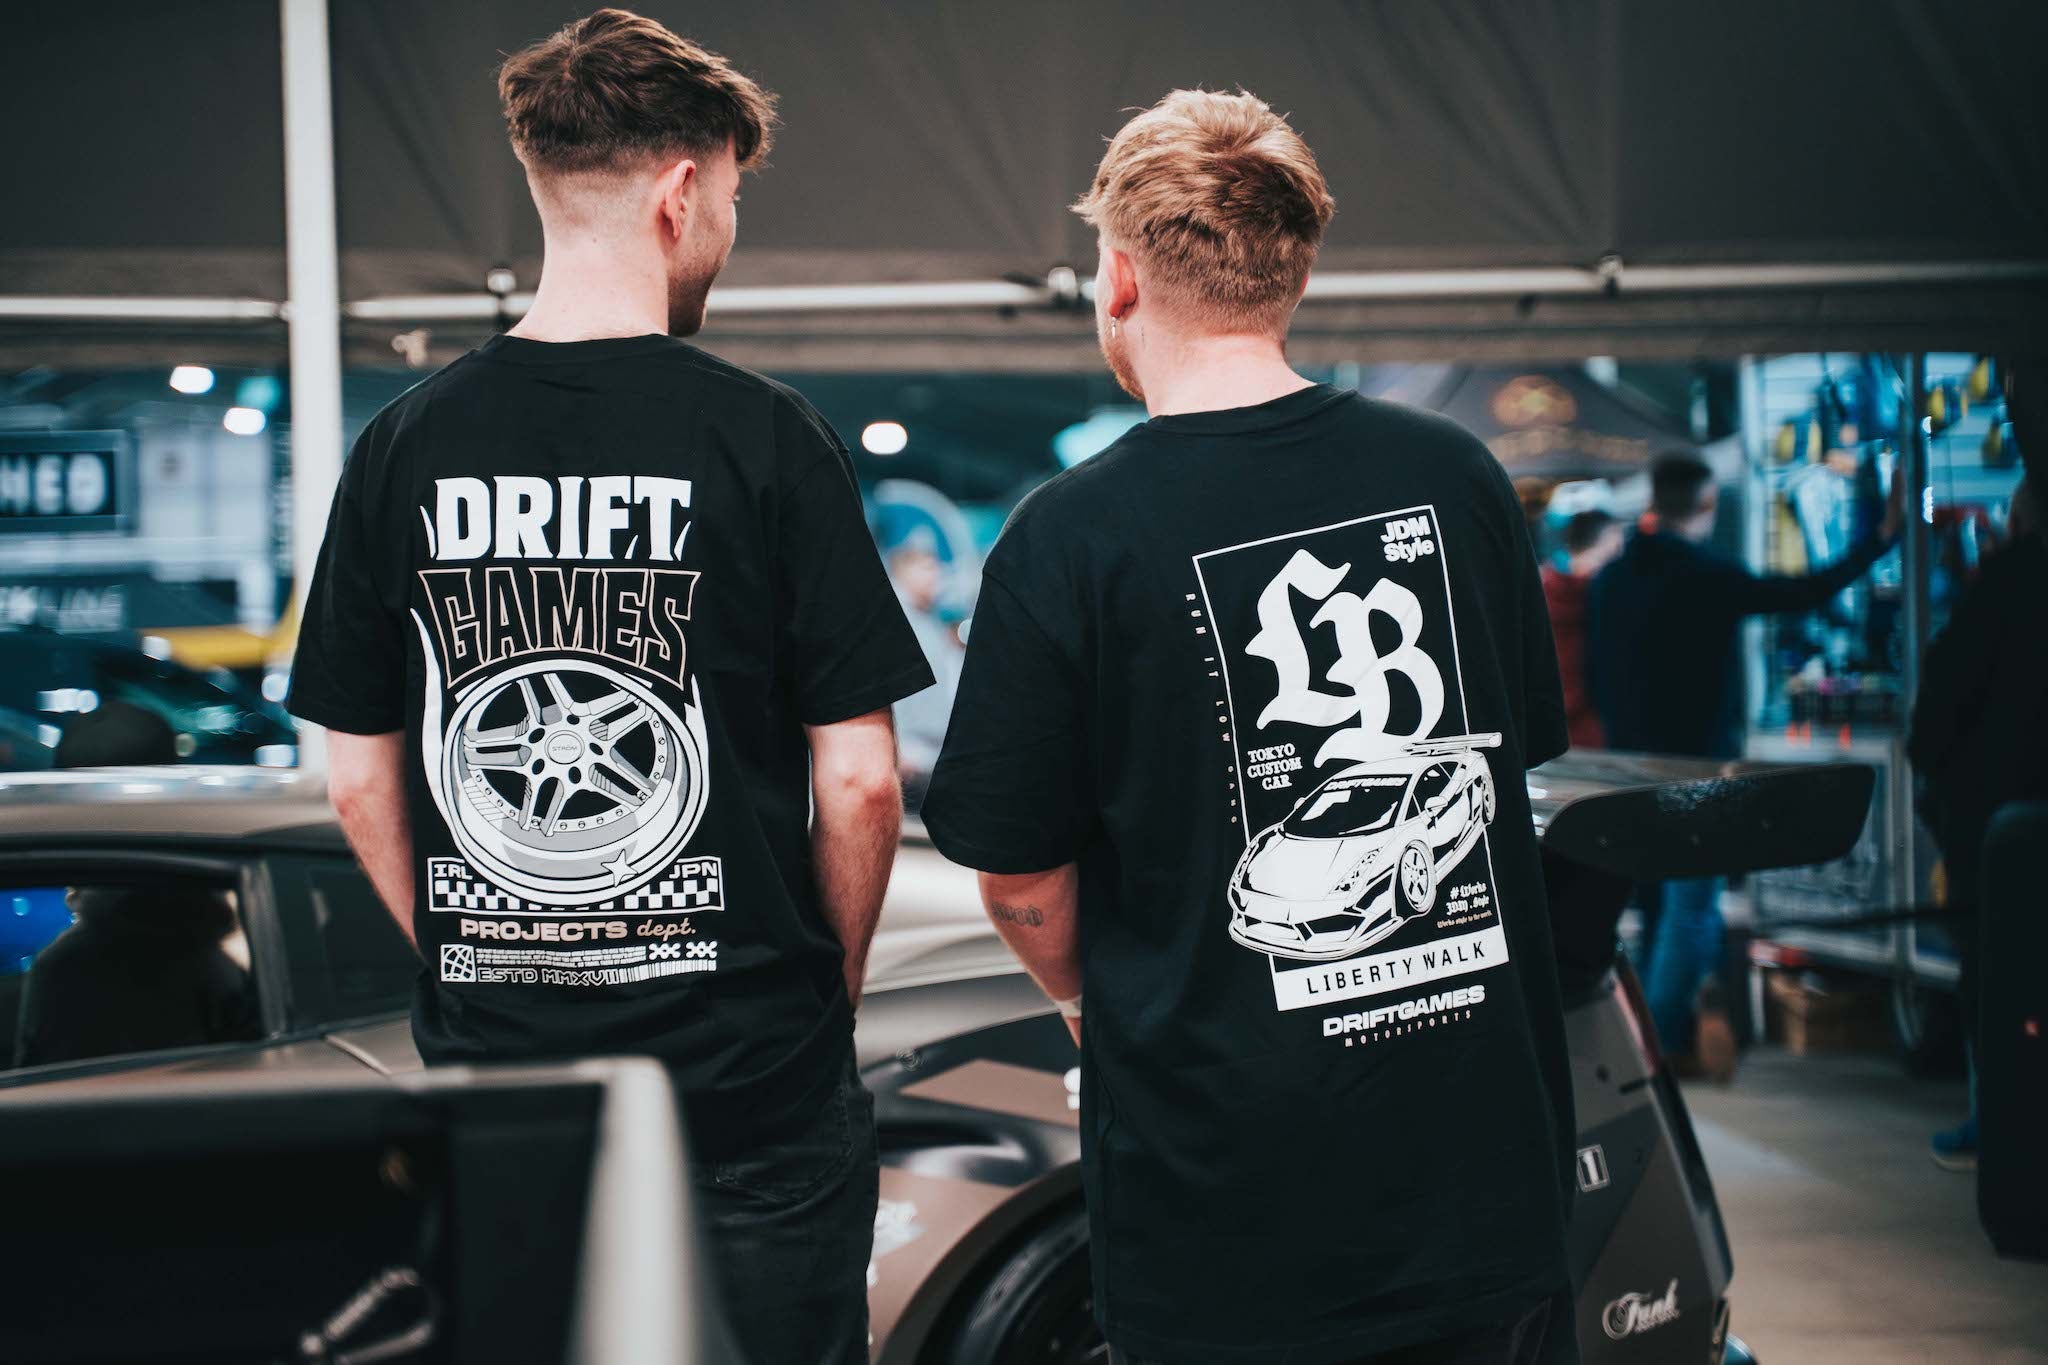 Everything  and we mean EVERYTHING 🤯 - Drift Games